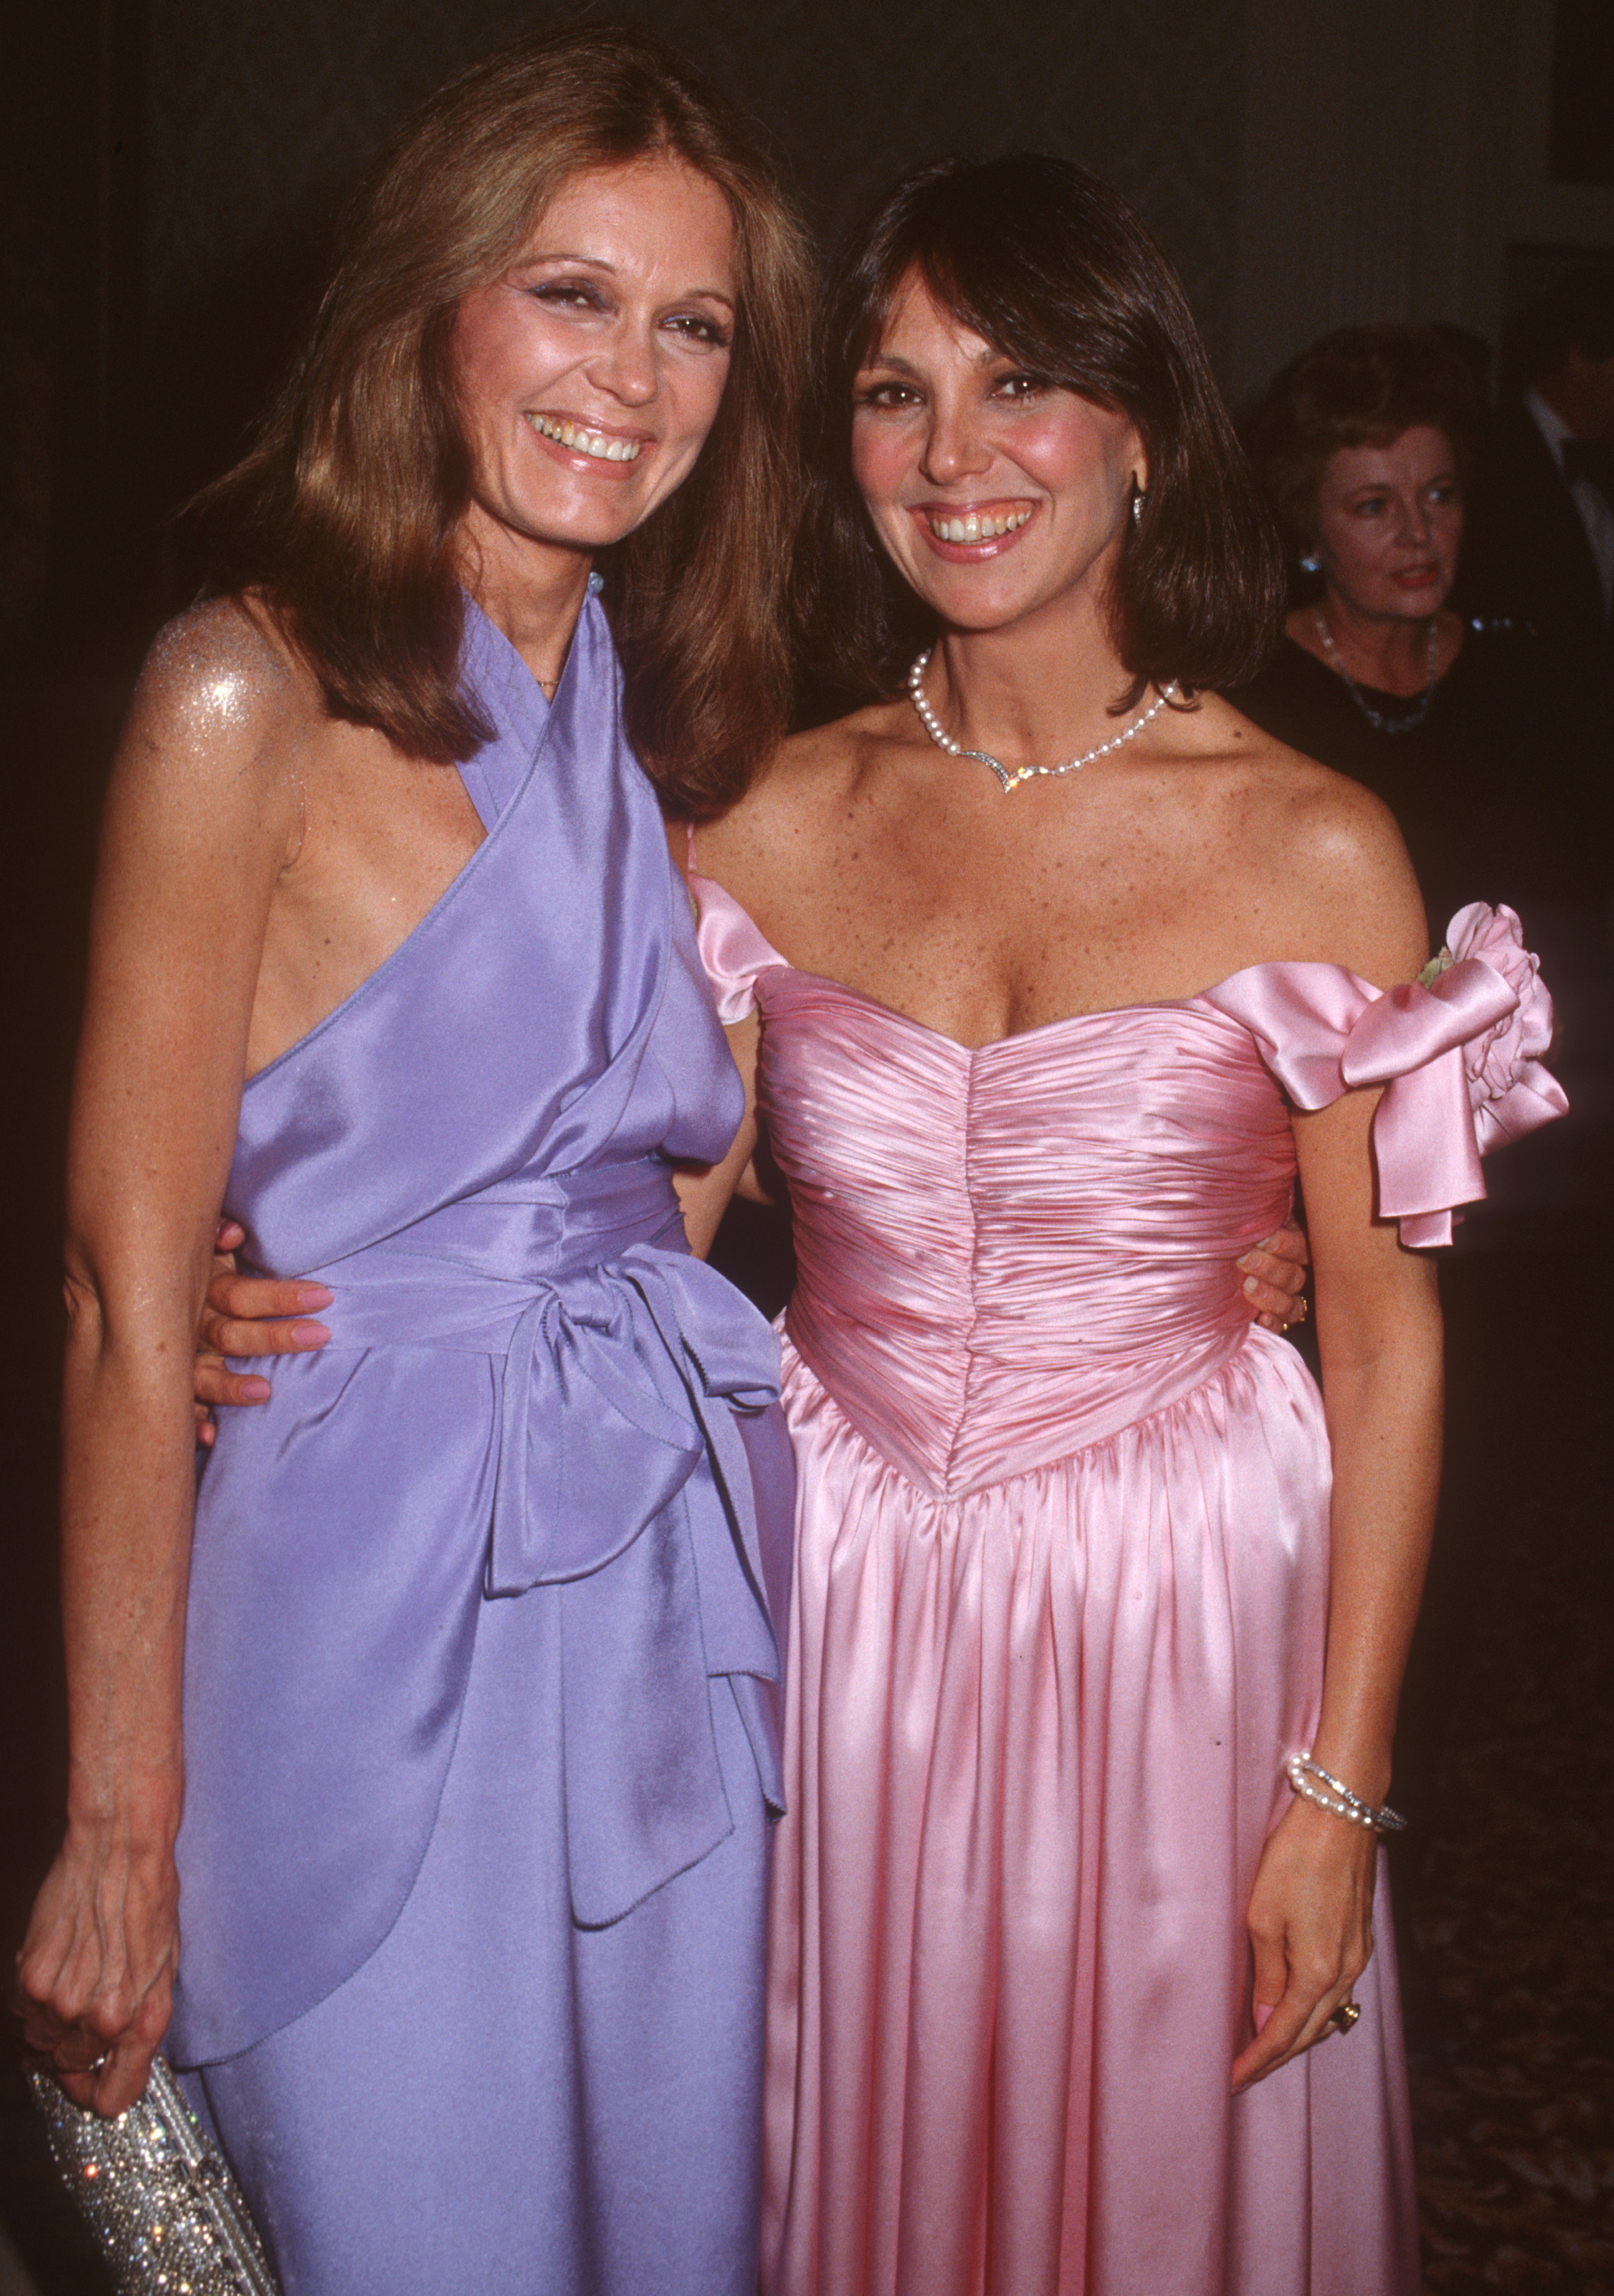 Gloria Steinem and Marlo Thomas during Gloria Steinem's 50th Birthday Party on May 23, 1984, at Waldor-Astoria Hotel in New York City.